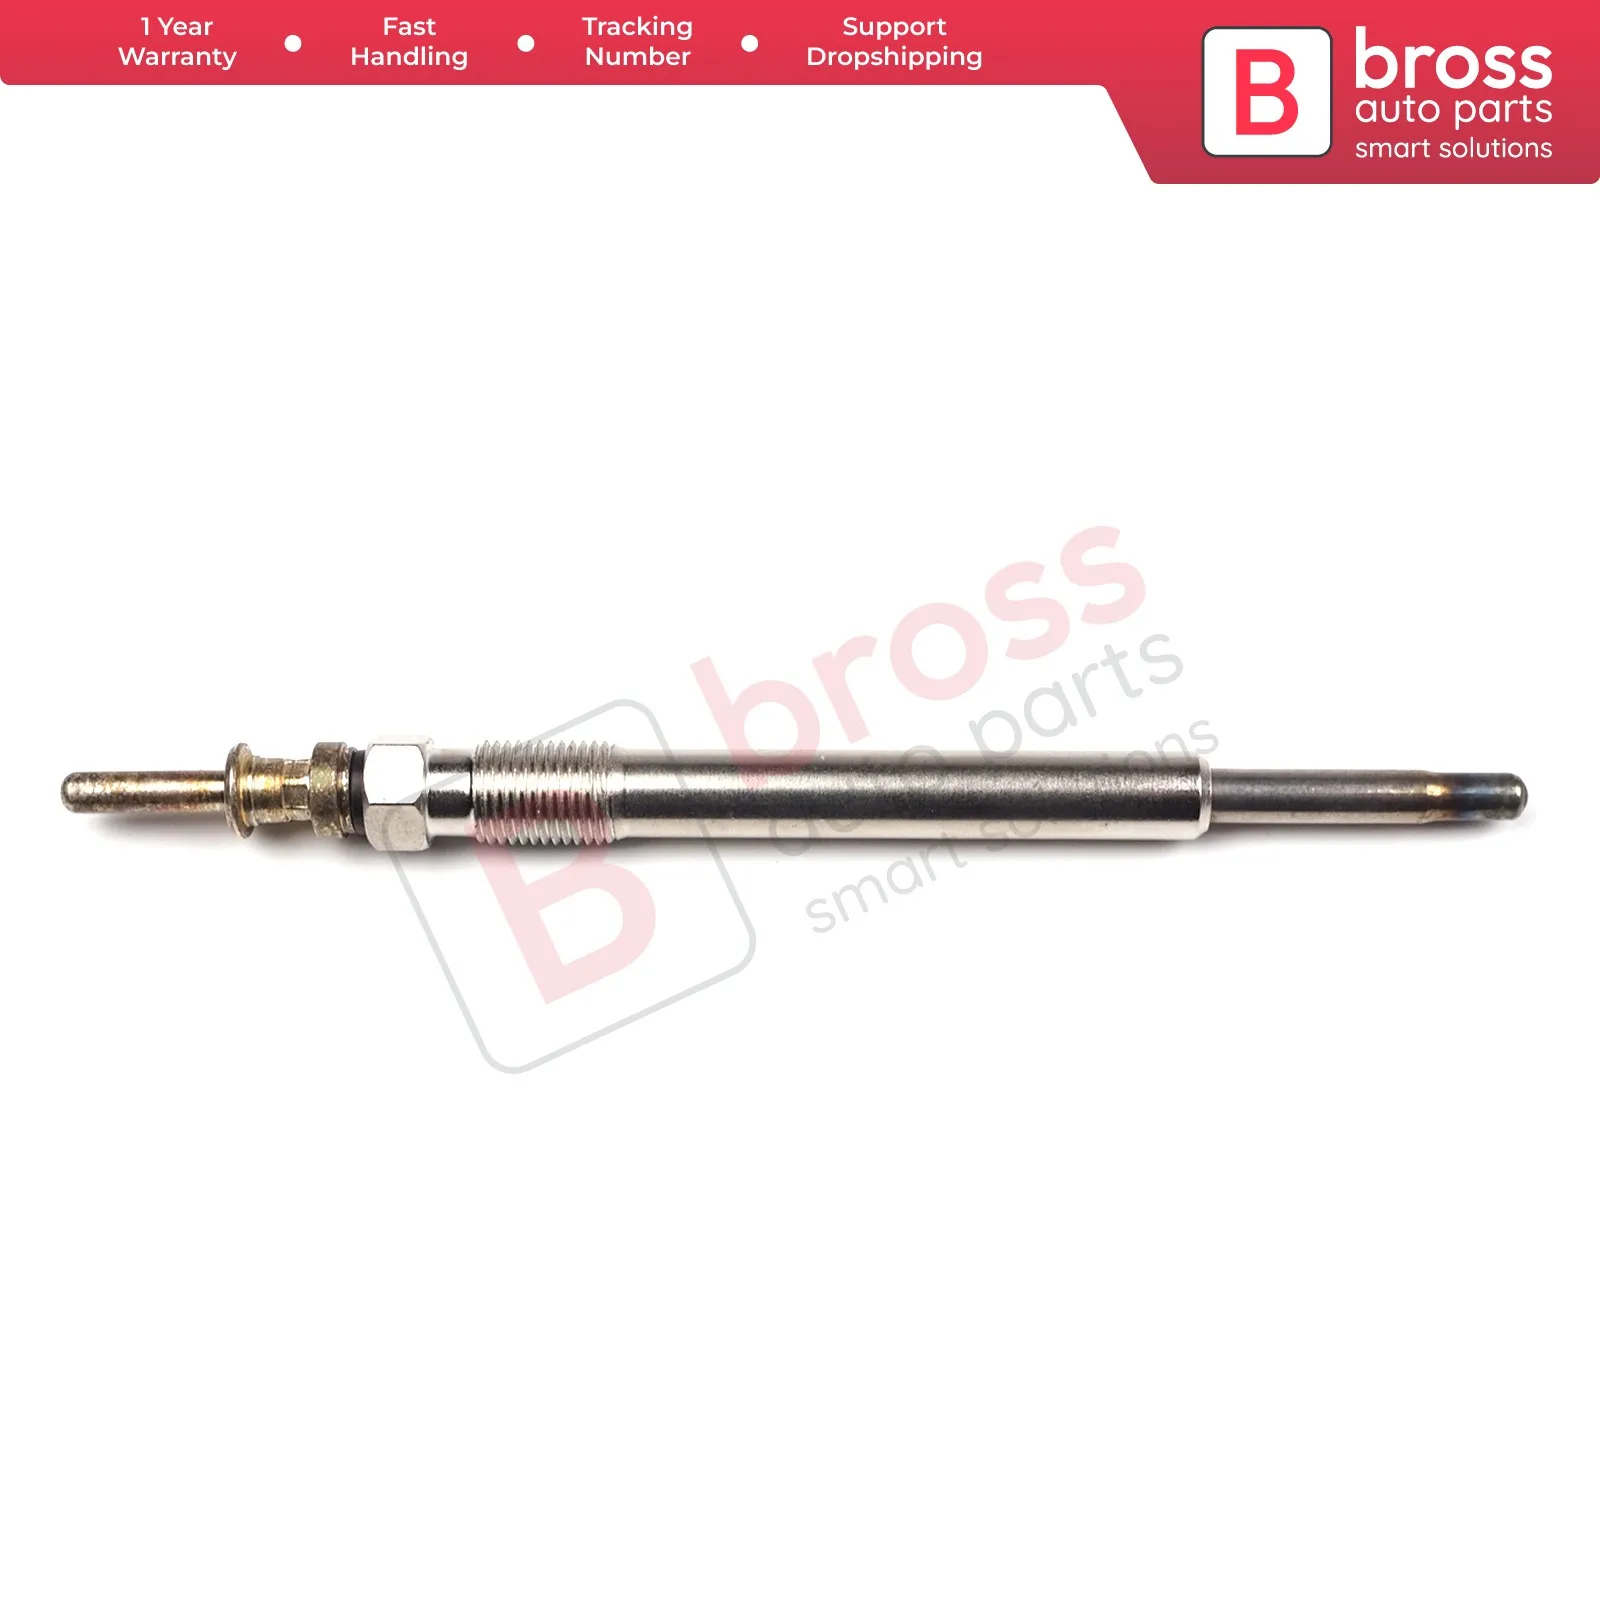 Bross Auto Parts BGP39 1 Piece Heater Glow Plugs GX133, 0 100 226 370, GN025 for BMW E38 740d Fast Shipment Ship From Turkey